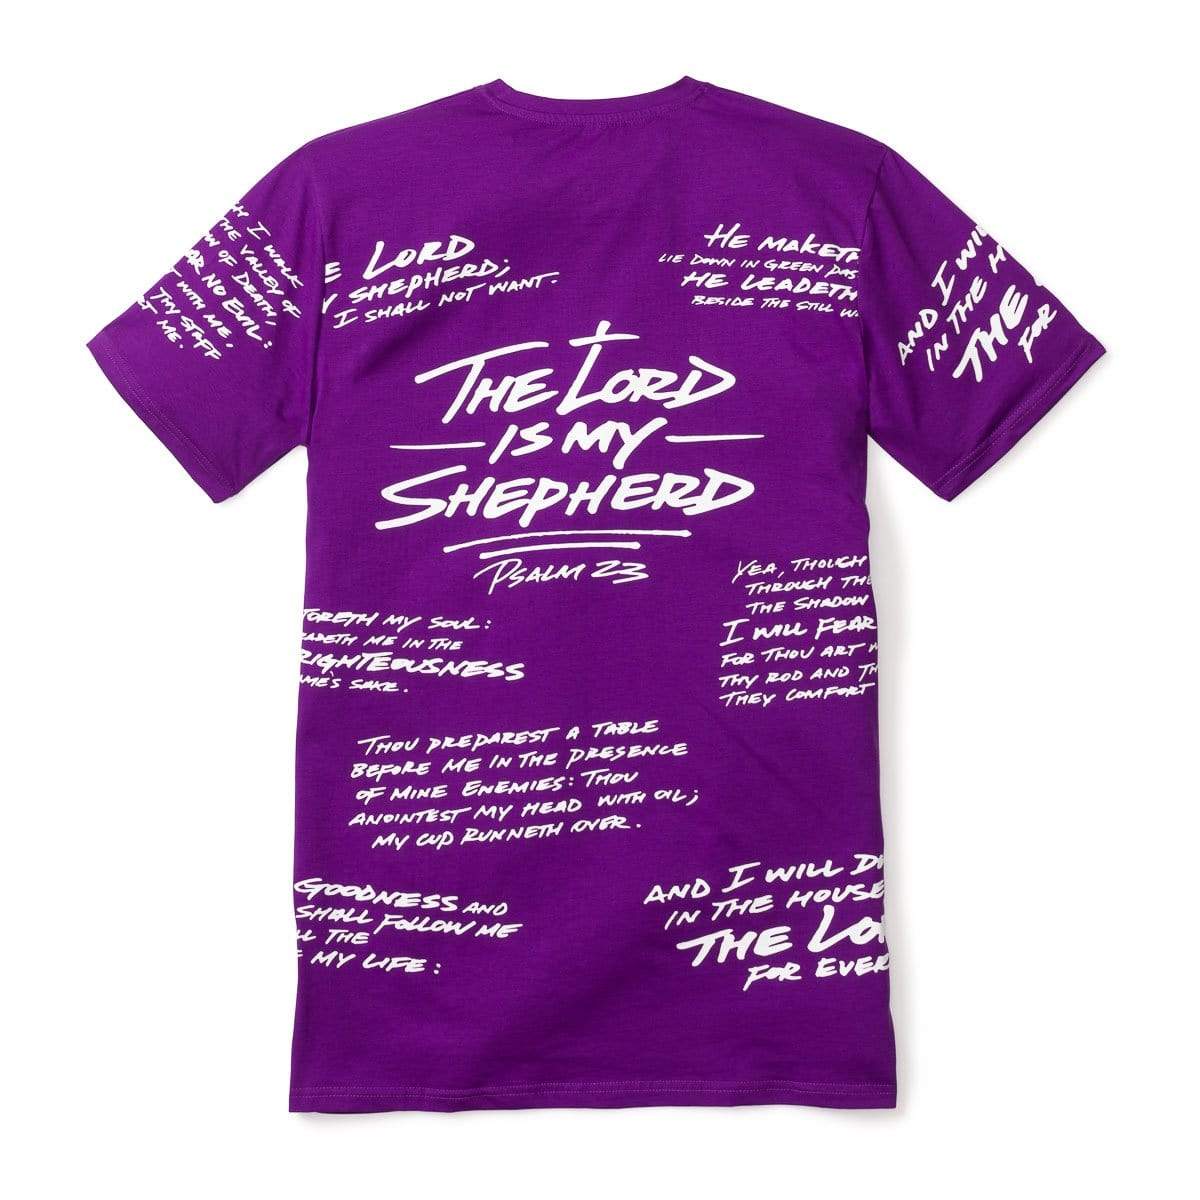 316collection Apparel Psalm 23 - All Over Premium Tee - Purple - Limited Edition